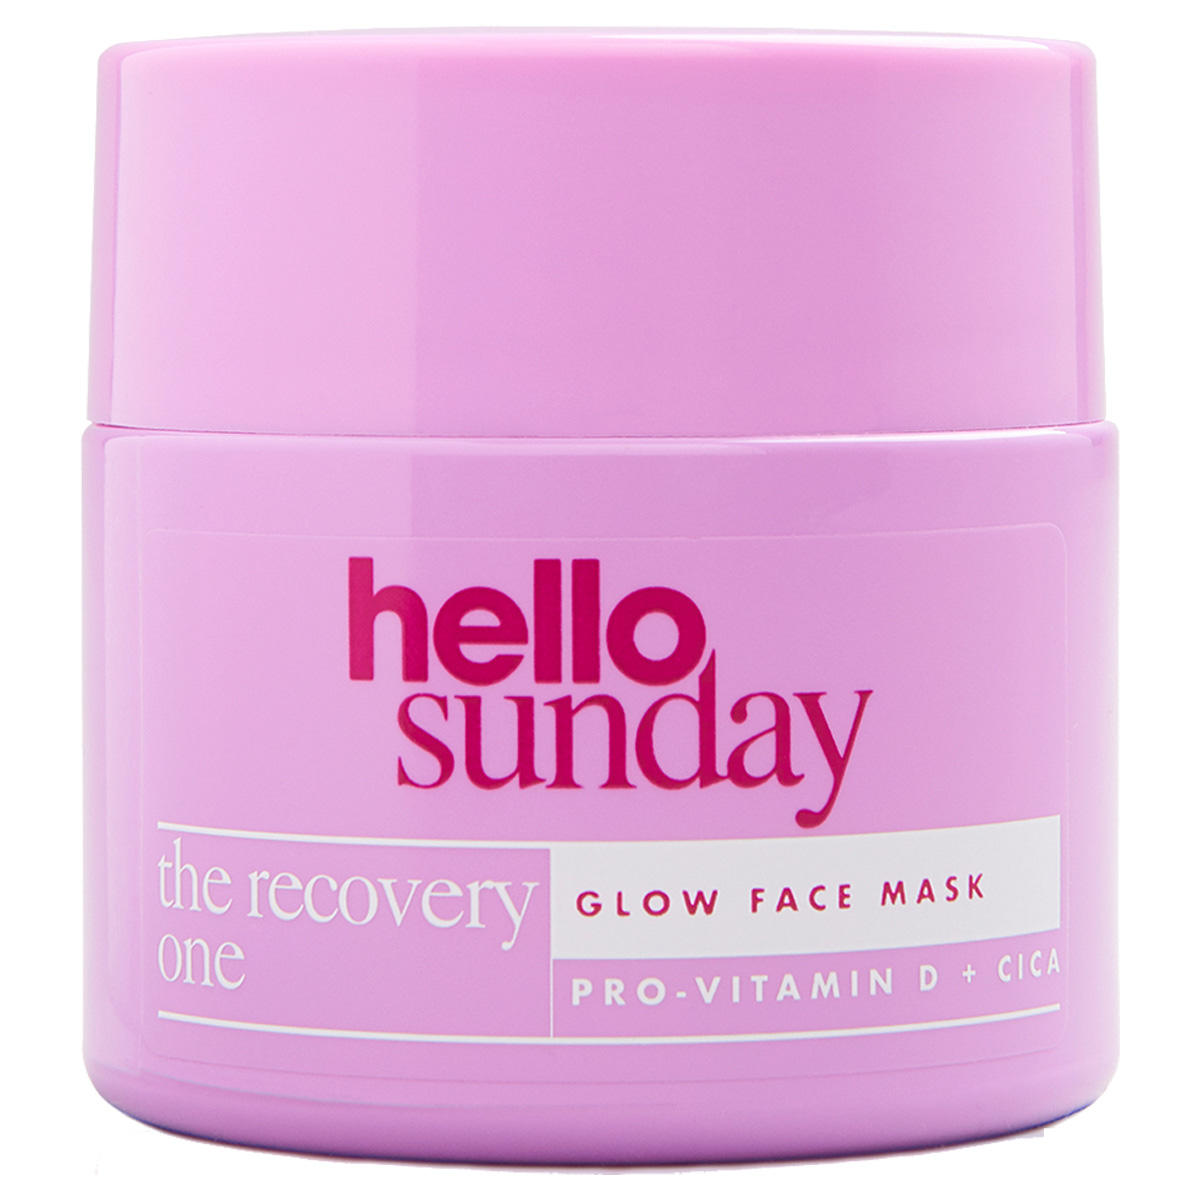 hello sunday the recovery one Glow face mask 50 ml - 1